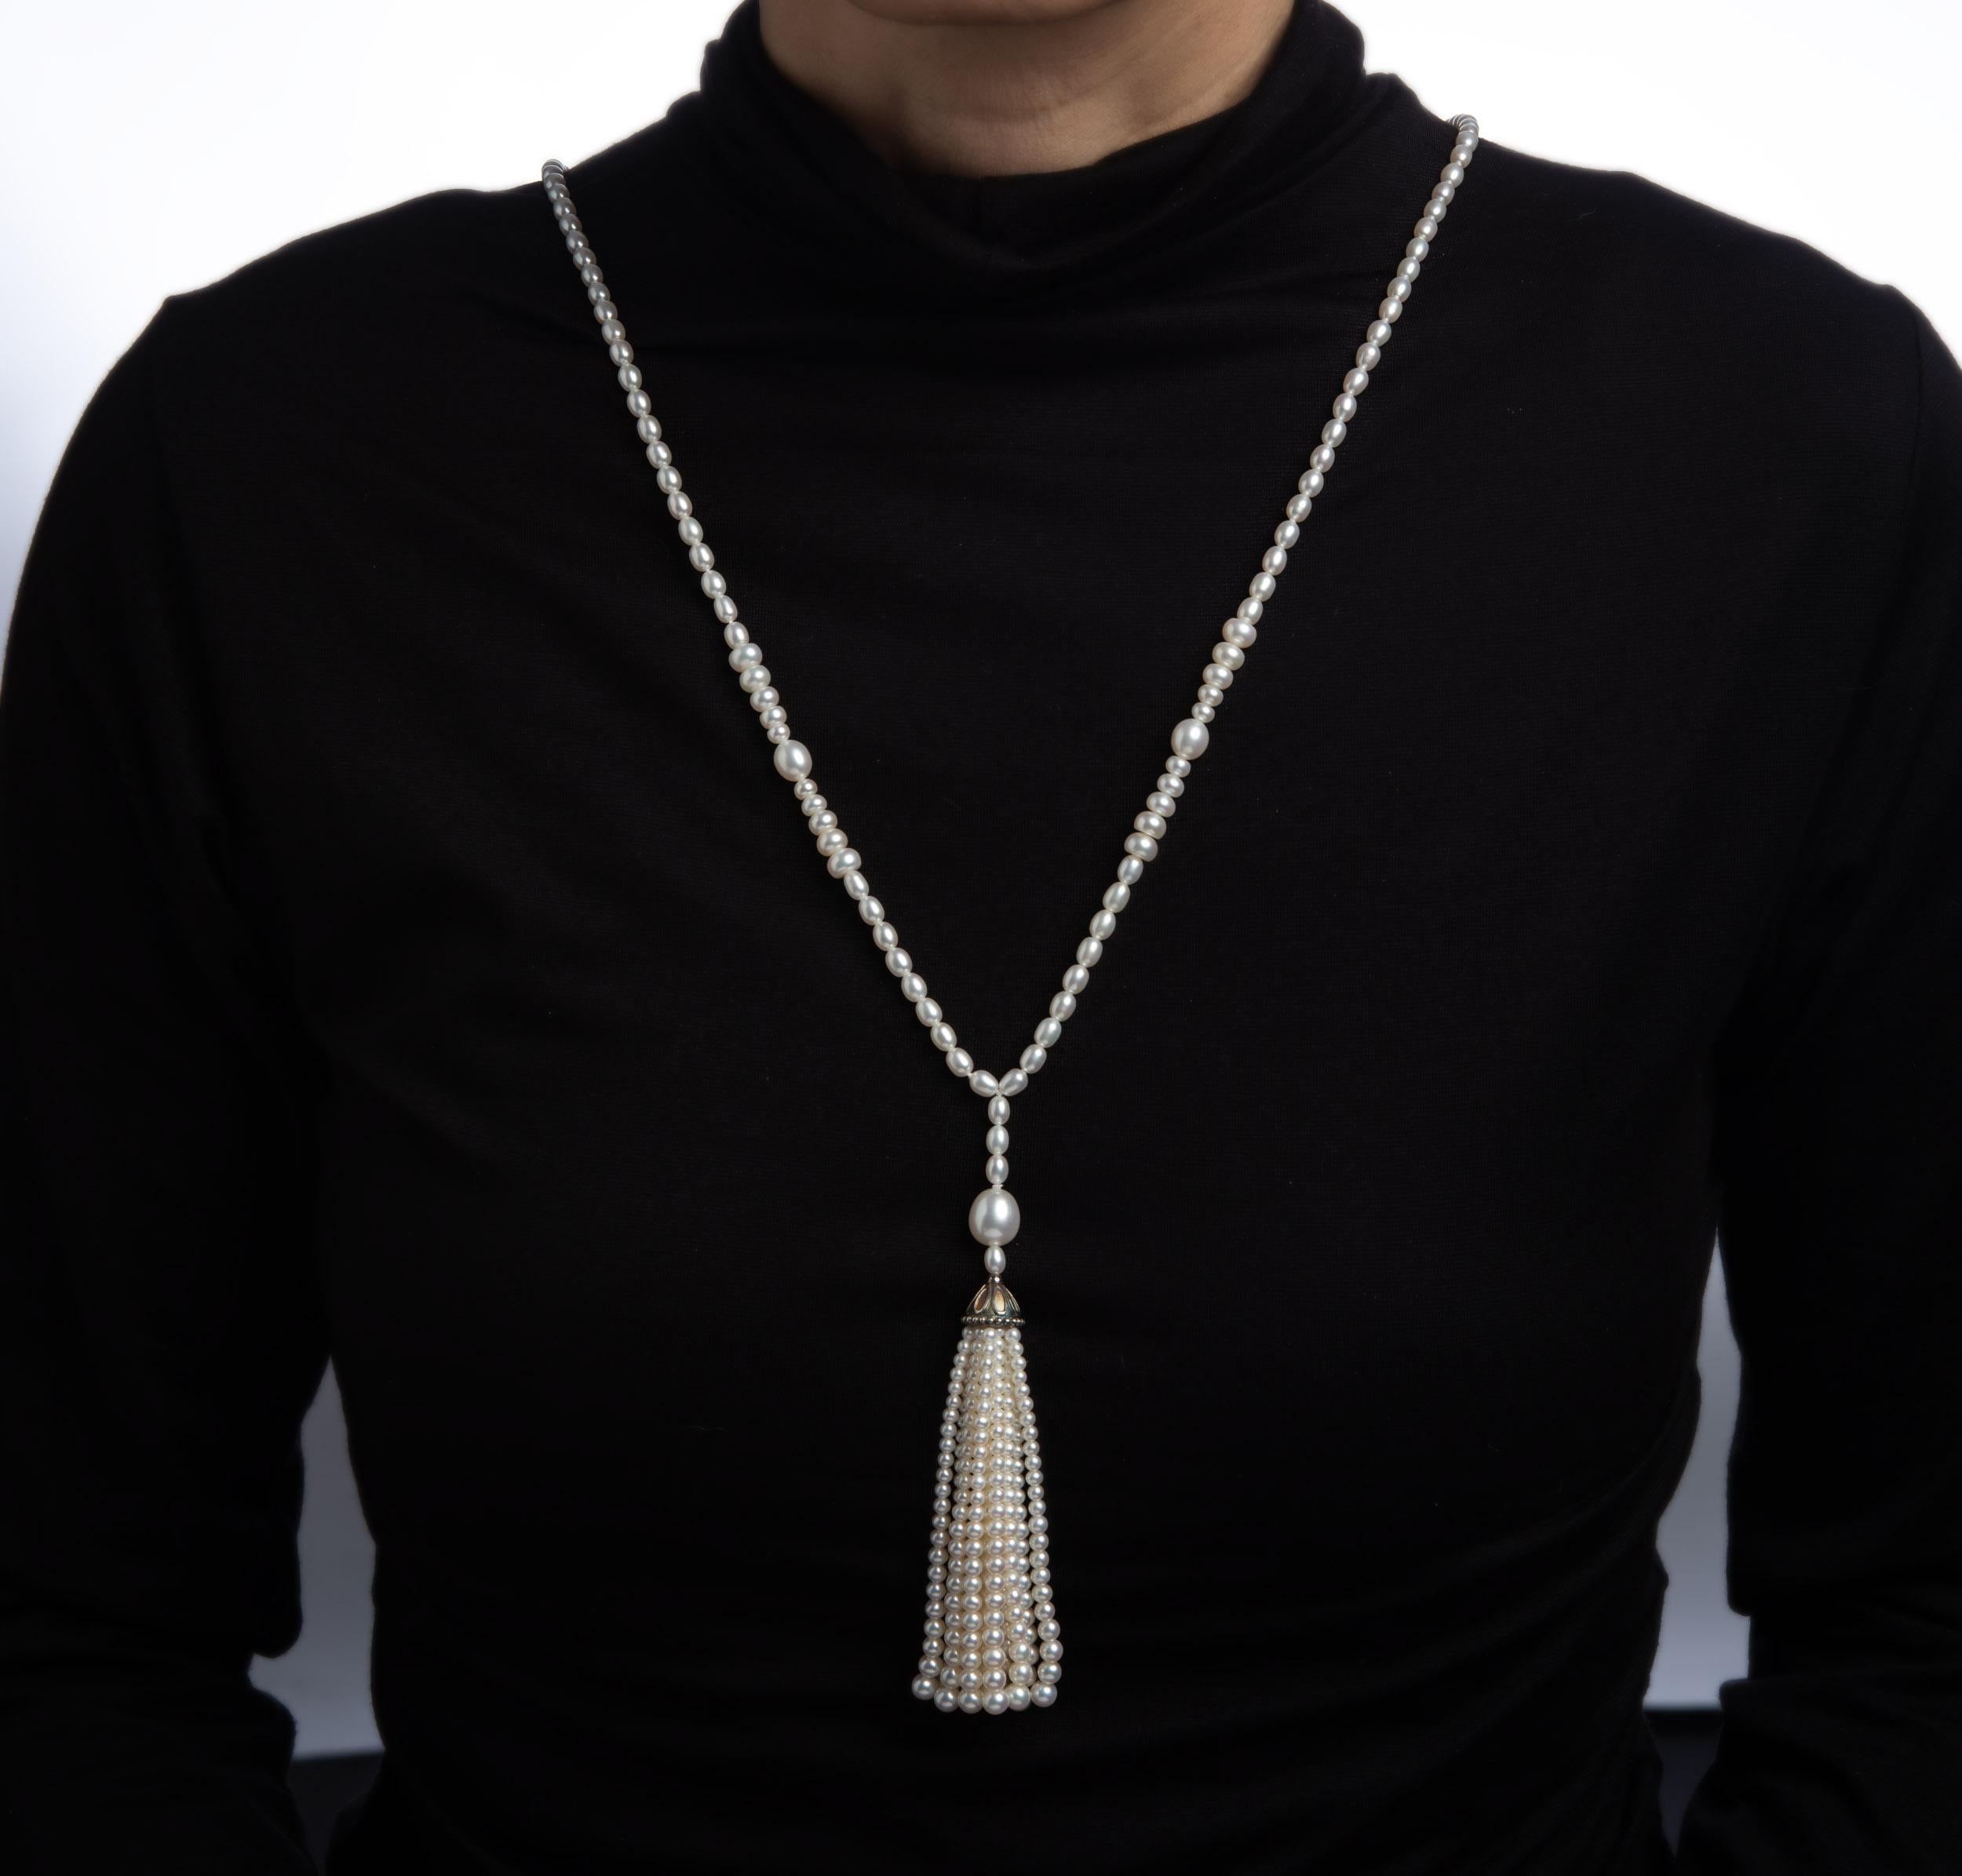 Stylish pre-owned Tiffany & Co Ziegfeld long freshwater cultured pearl necklace.   
The necklace is strung with a graduation of freshwater cultured pearls ranging in size from 4.2mm to 9.5mm. The pearls exhibit excellent luster and are meticulously